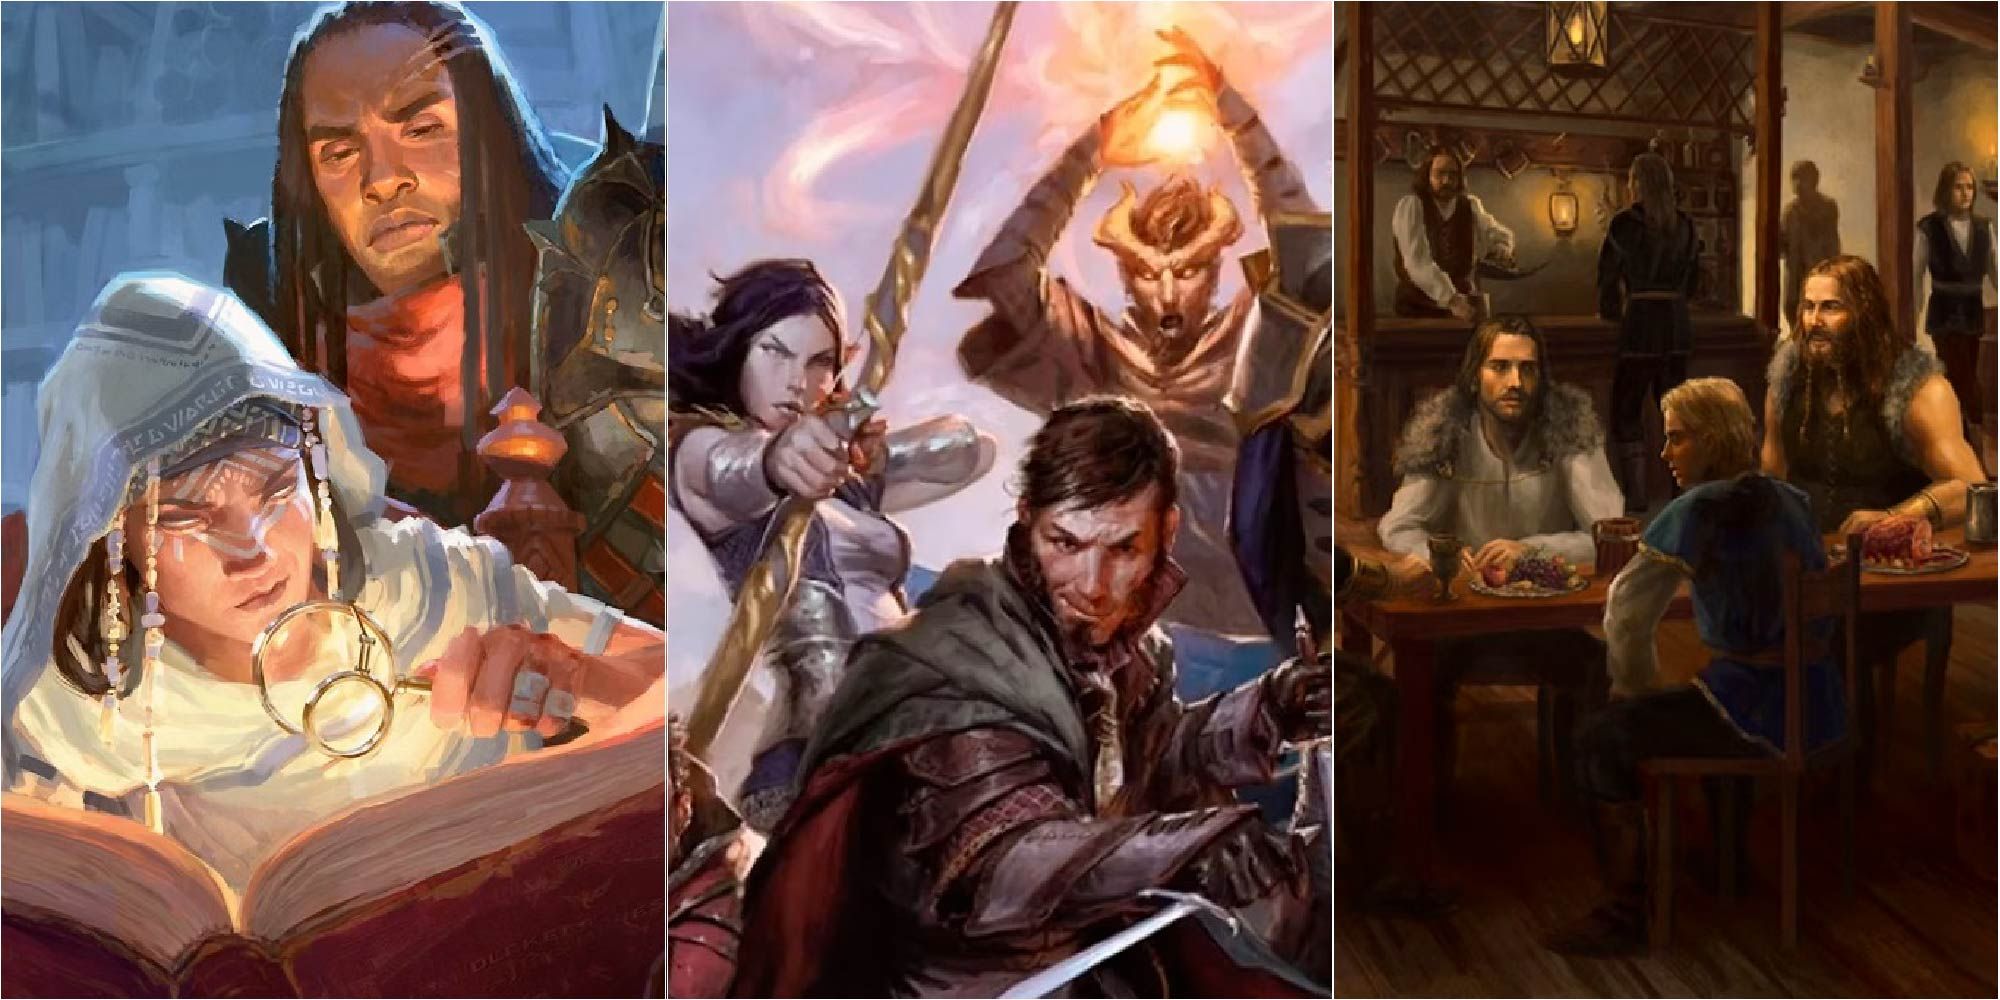 A montage of images from Dungeons and Dragons (D&D)